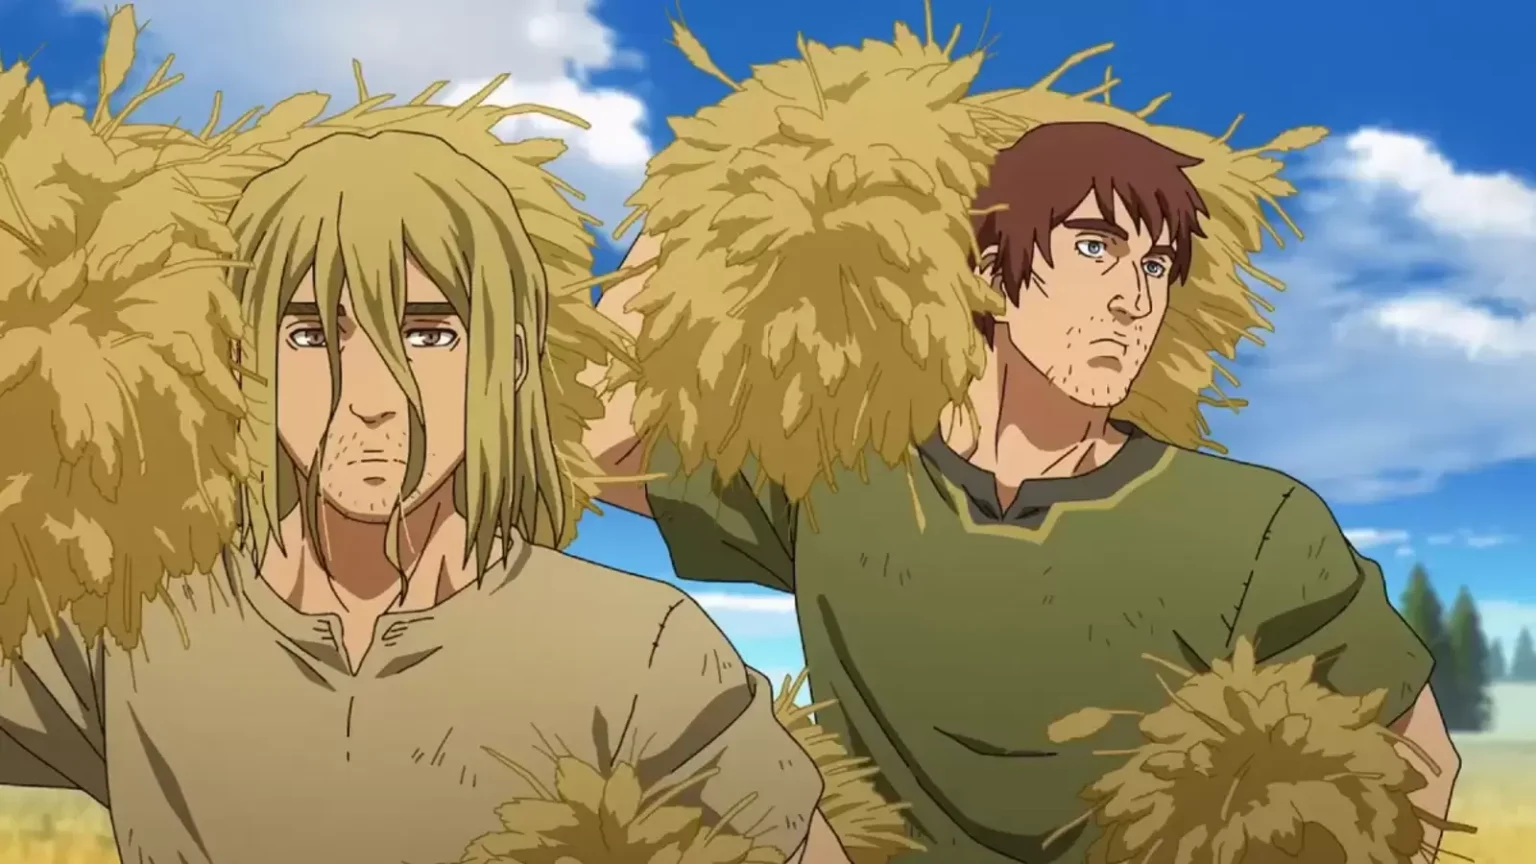 Can I watch Vinland Saga for free online?